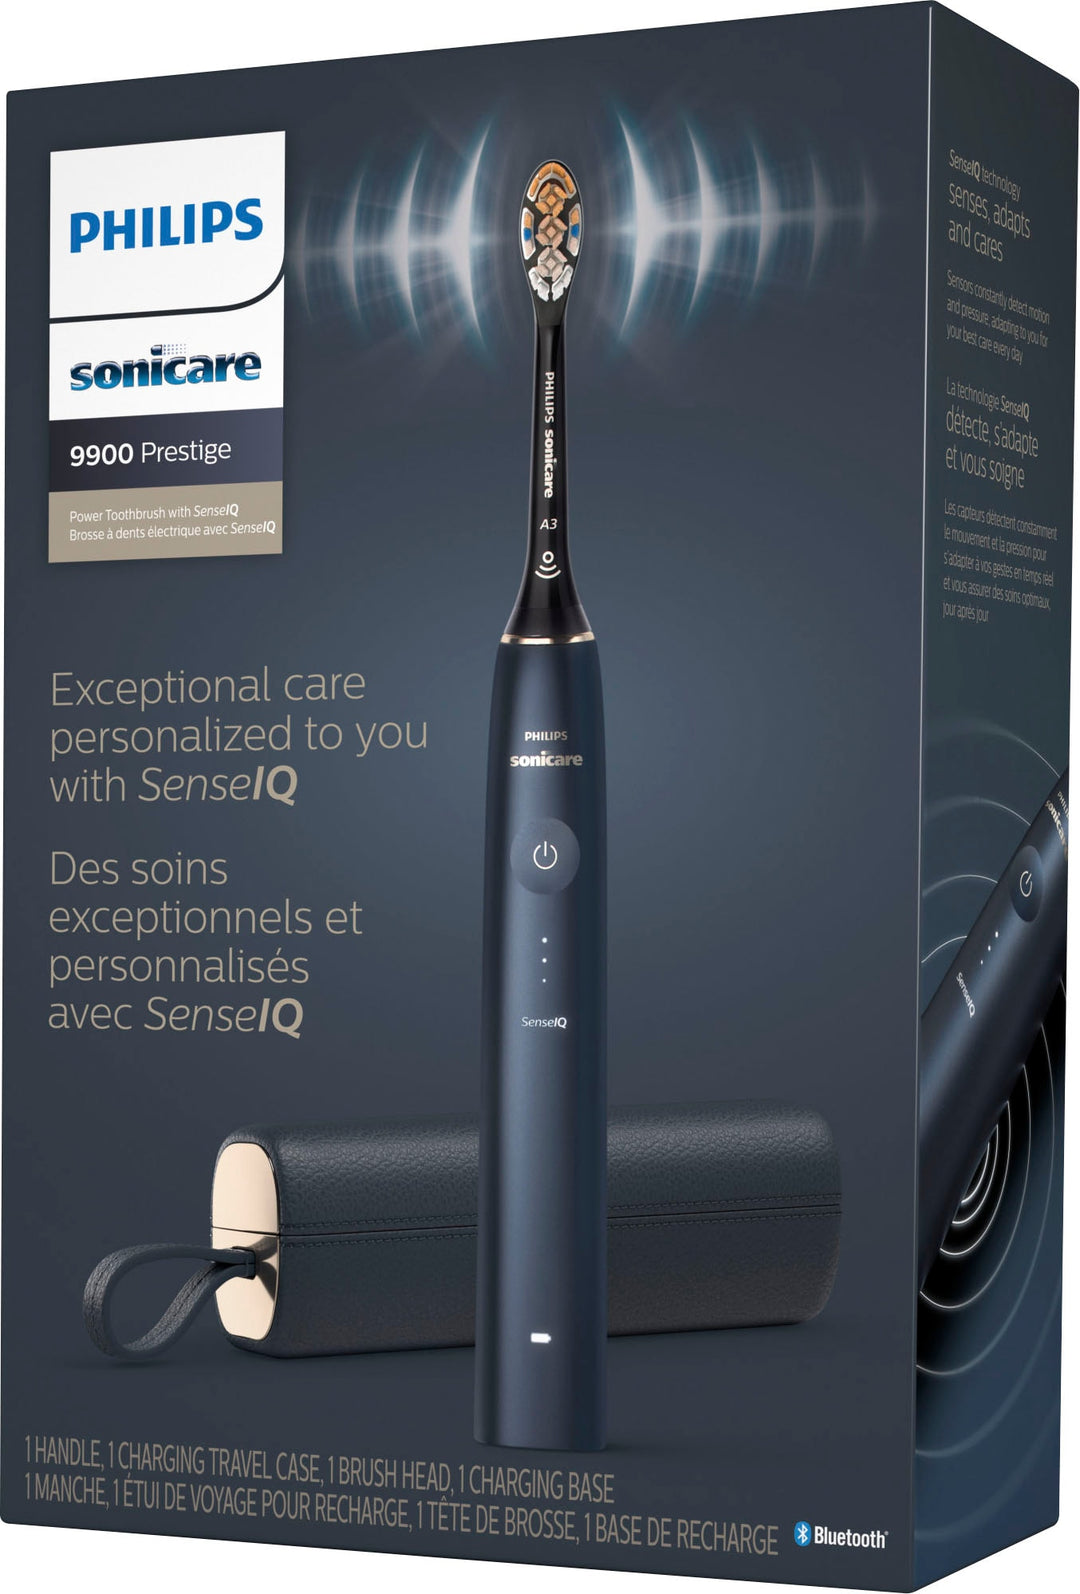 Philips Sonicare 9900 Prestige Rechargeable Electric Toothbrush with SenseIQ - Midnight_10